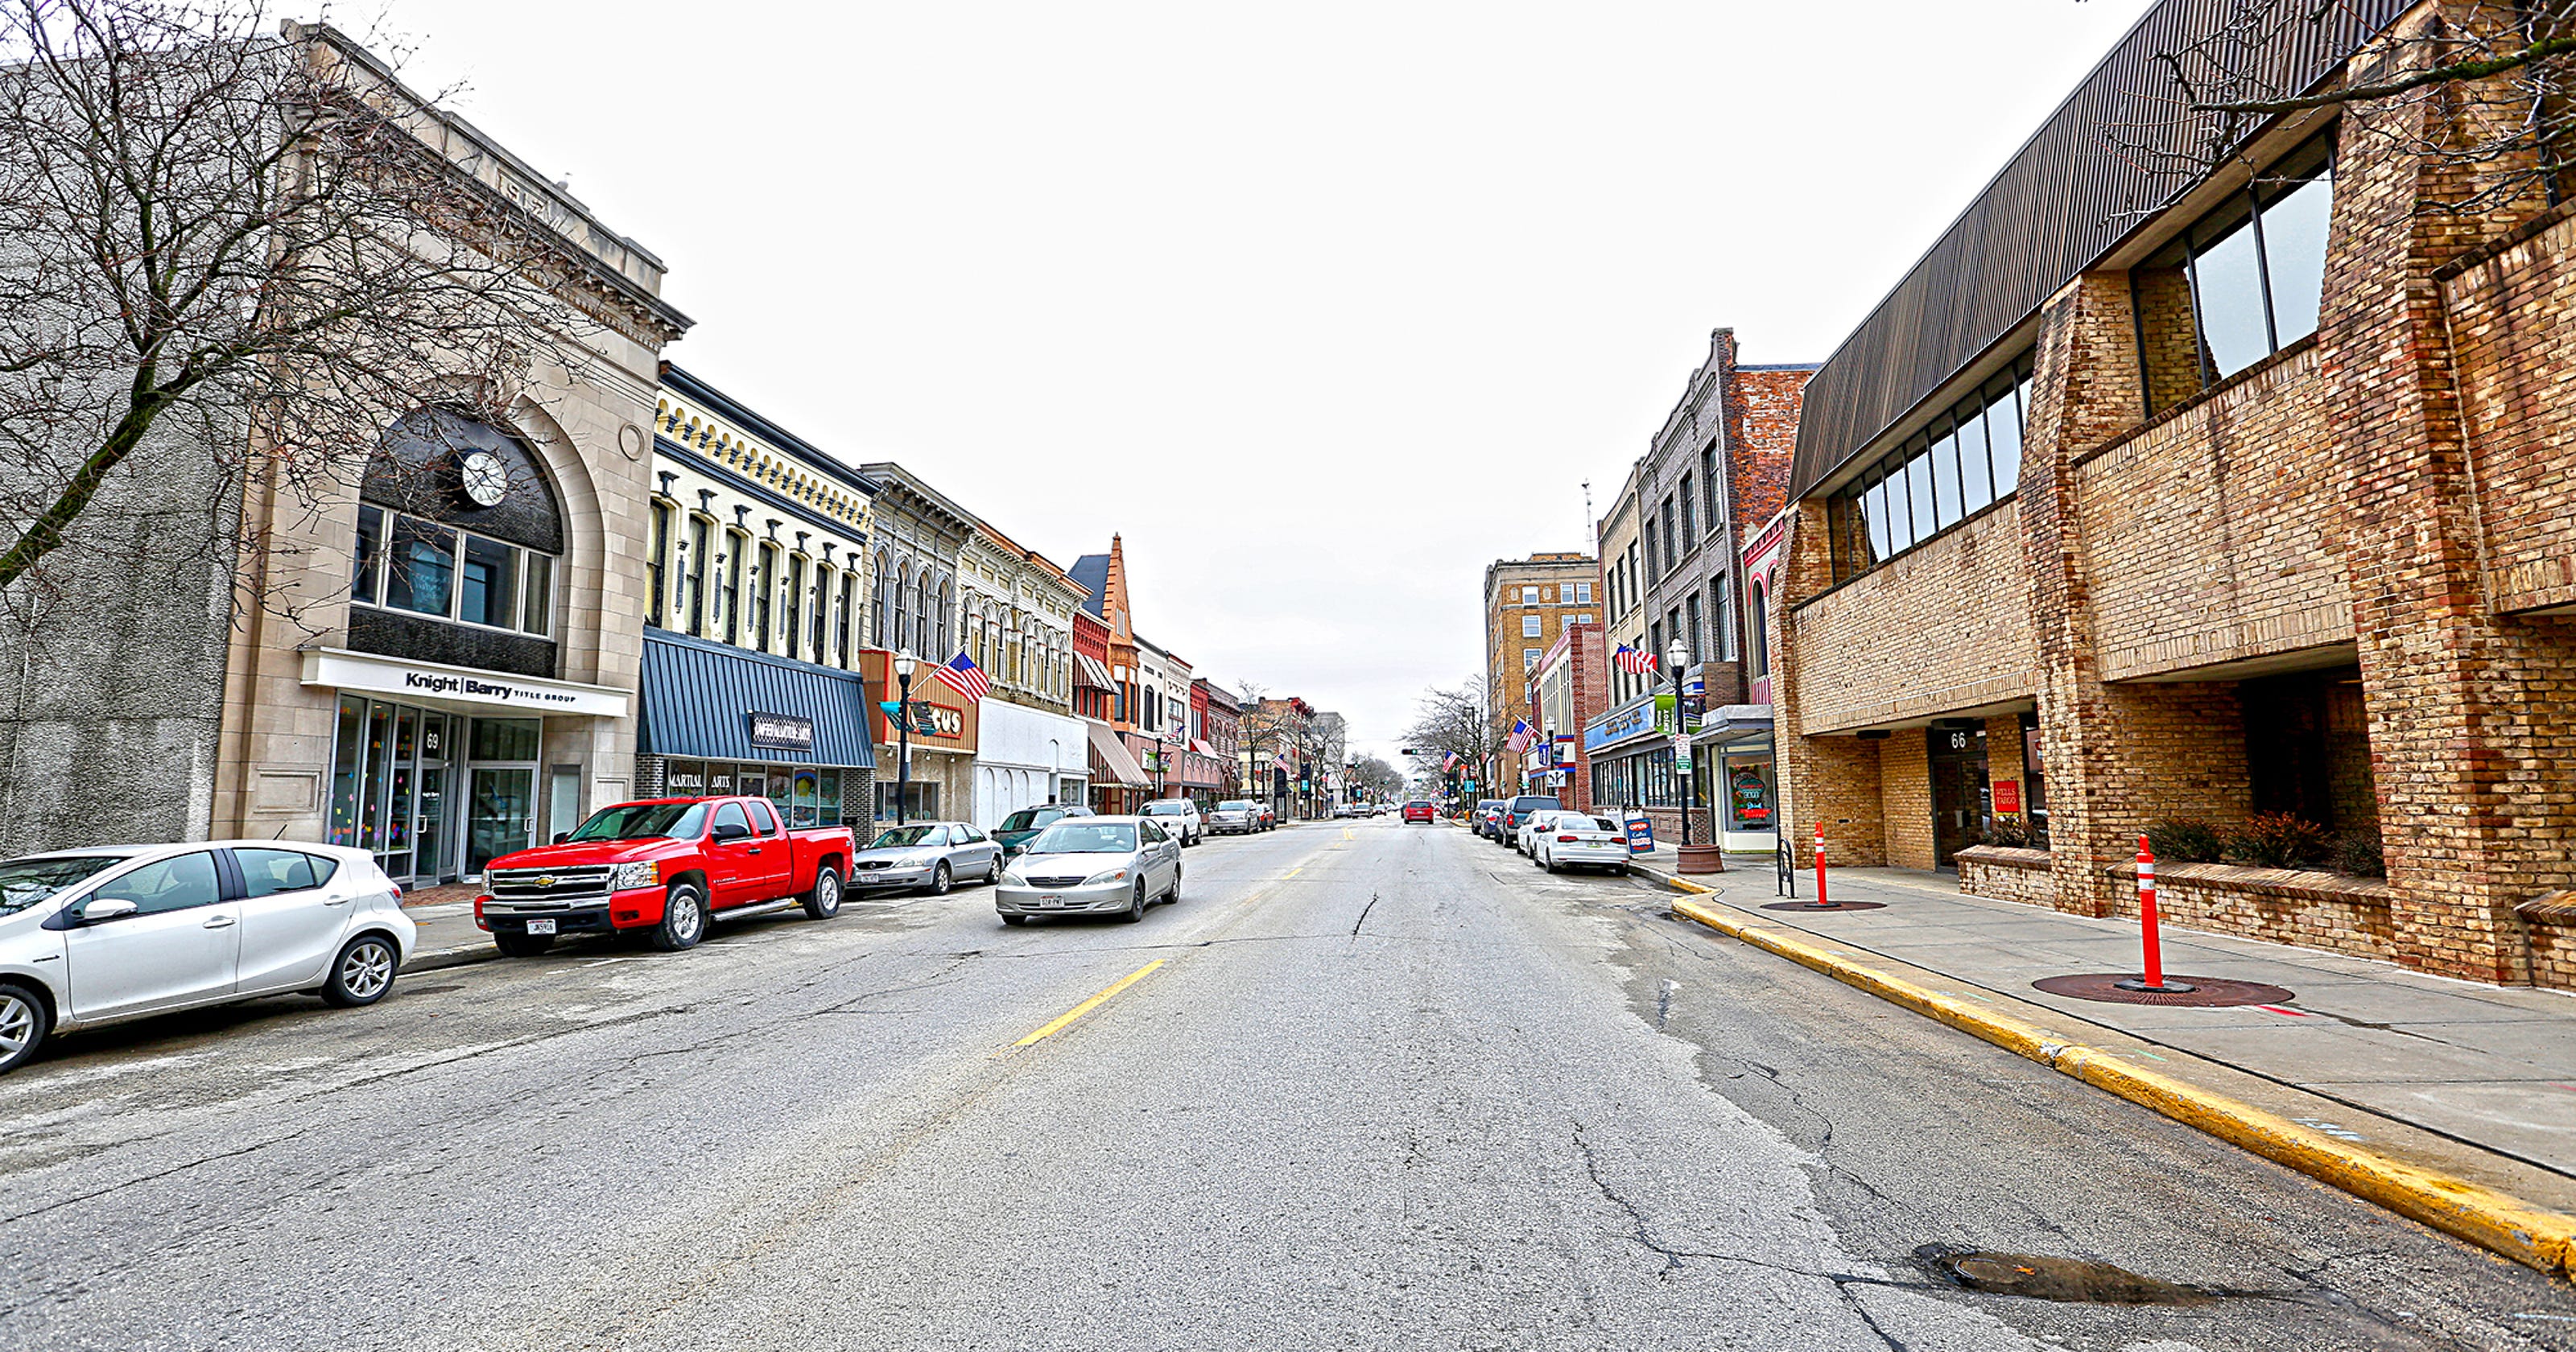 Is Fond du Lac the most boring city in Wisconsin? Streetwise